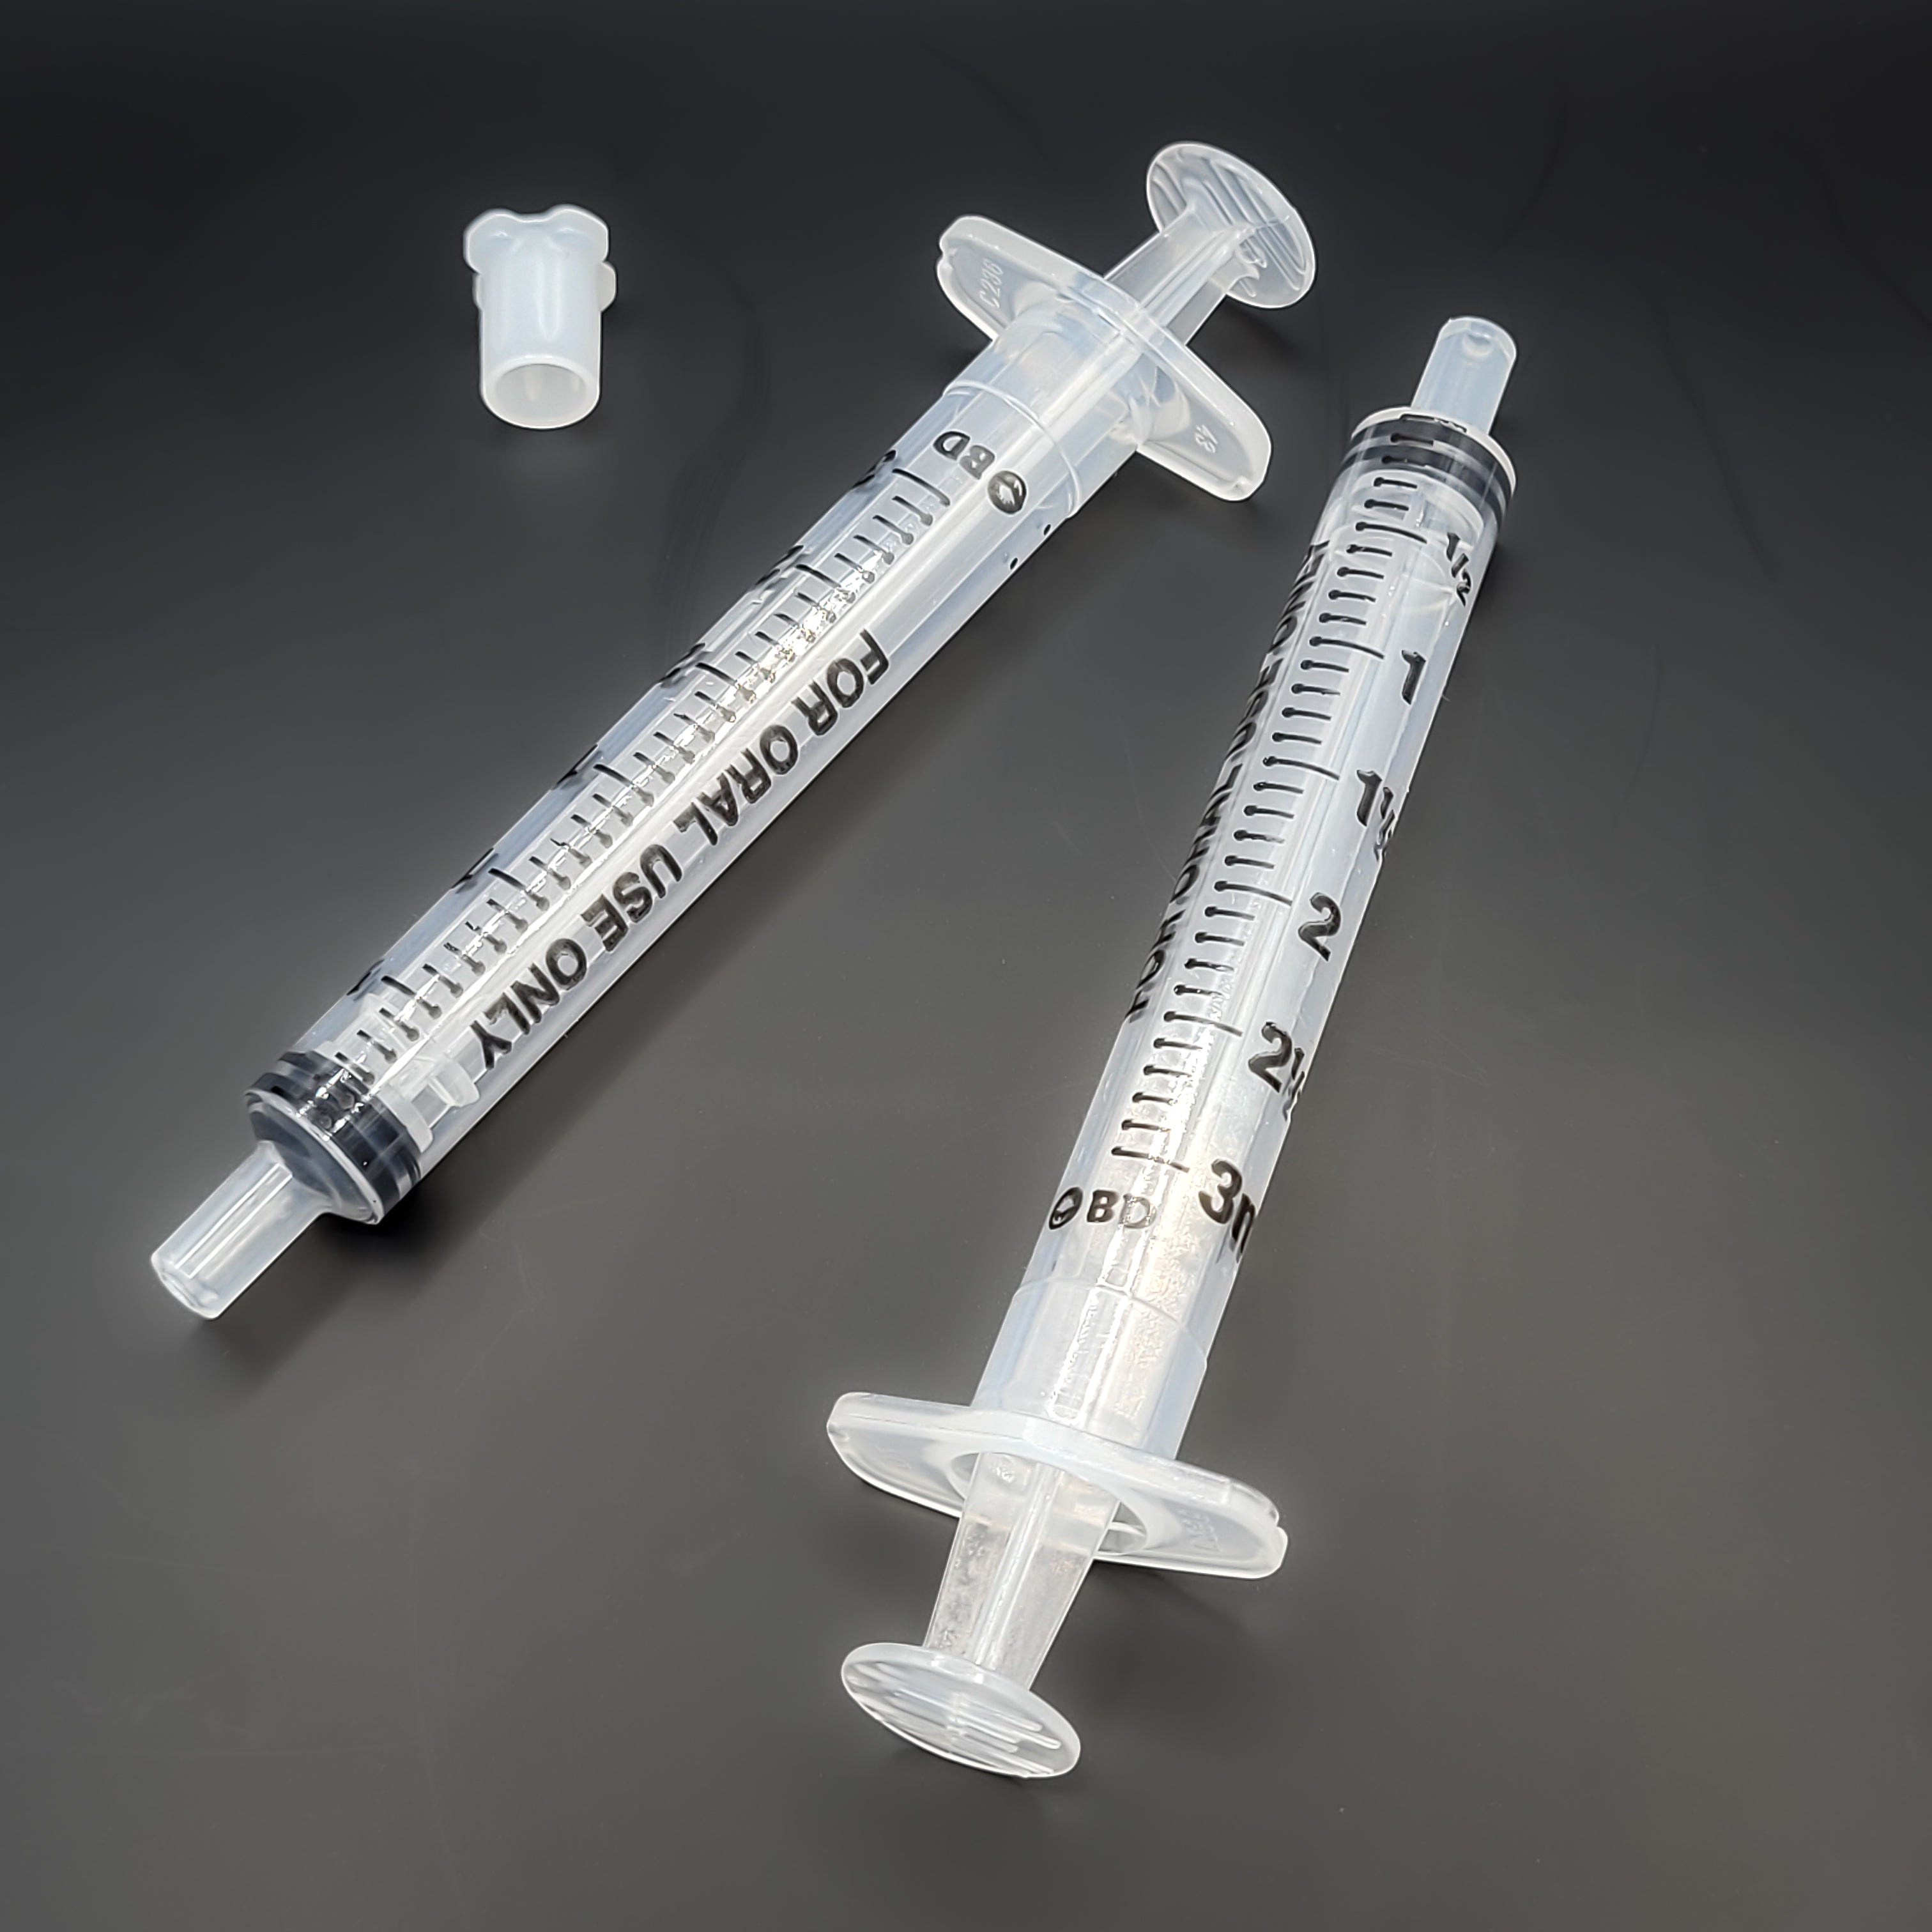 BD Clear Oral Syringes with tips (3ml)